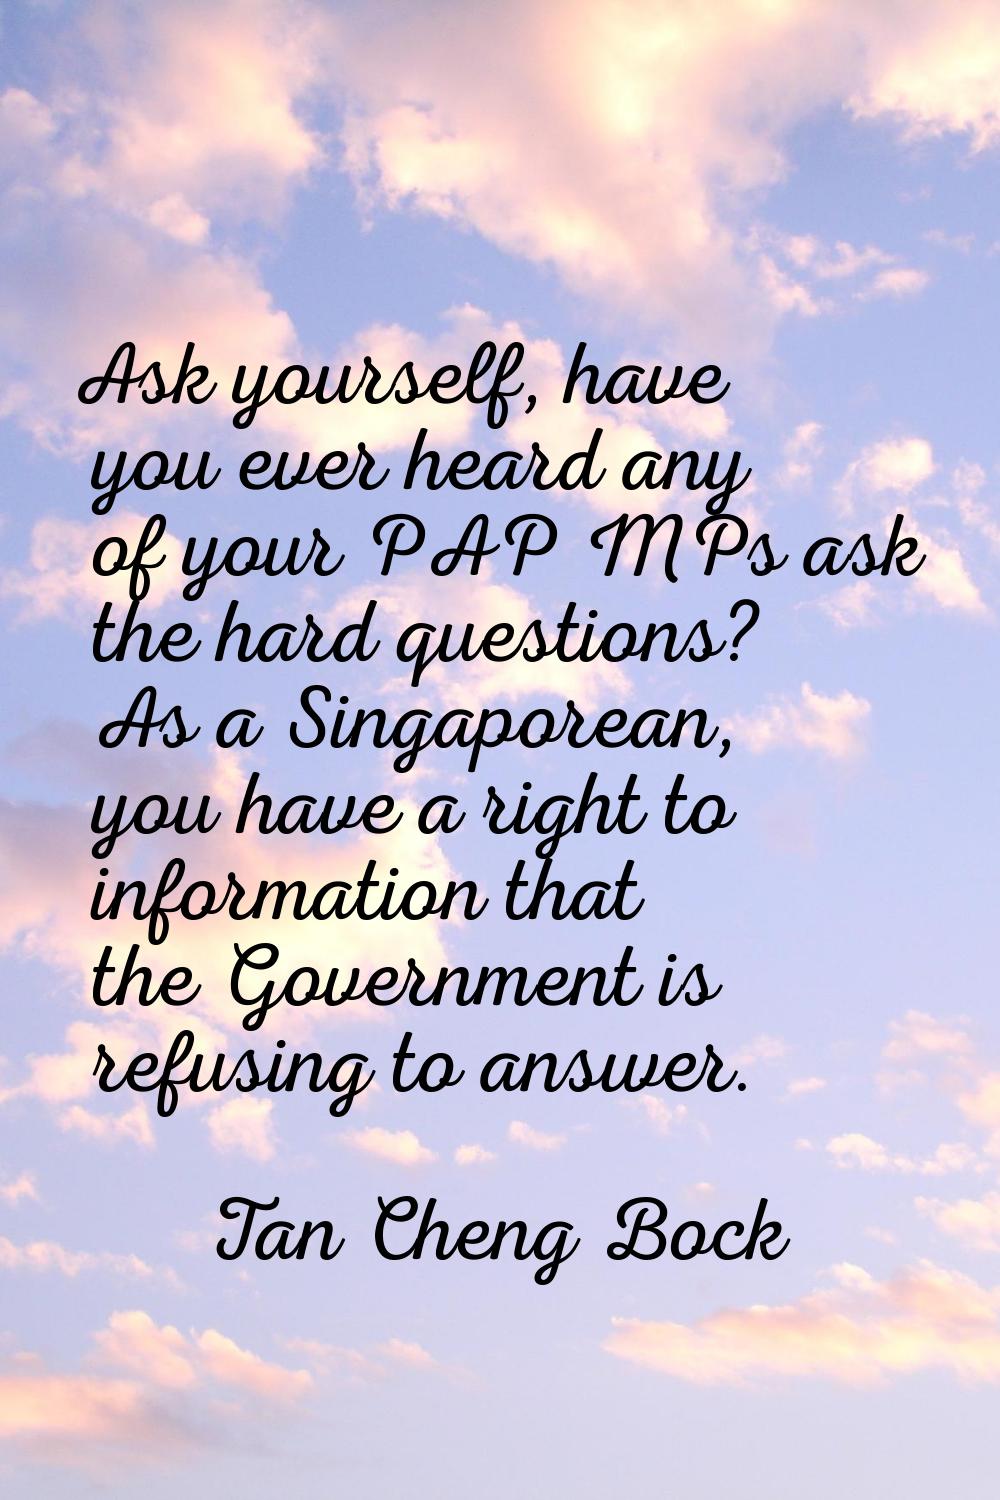 Ask yourself, have you ever heard any of your PAP MPs ask the hard questions? As a Singaporean, you